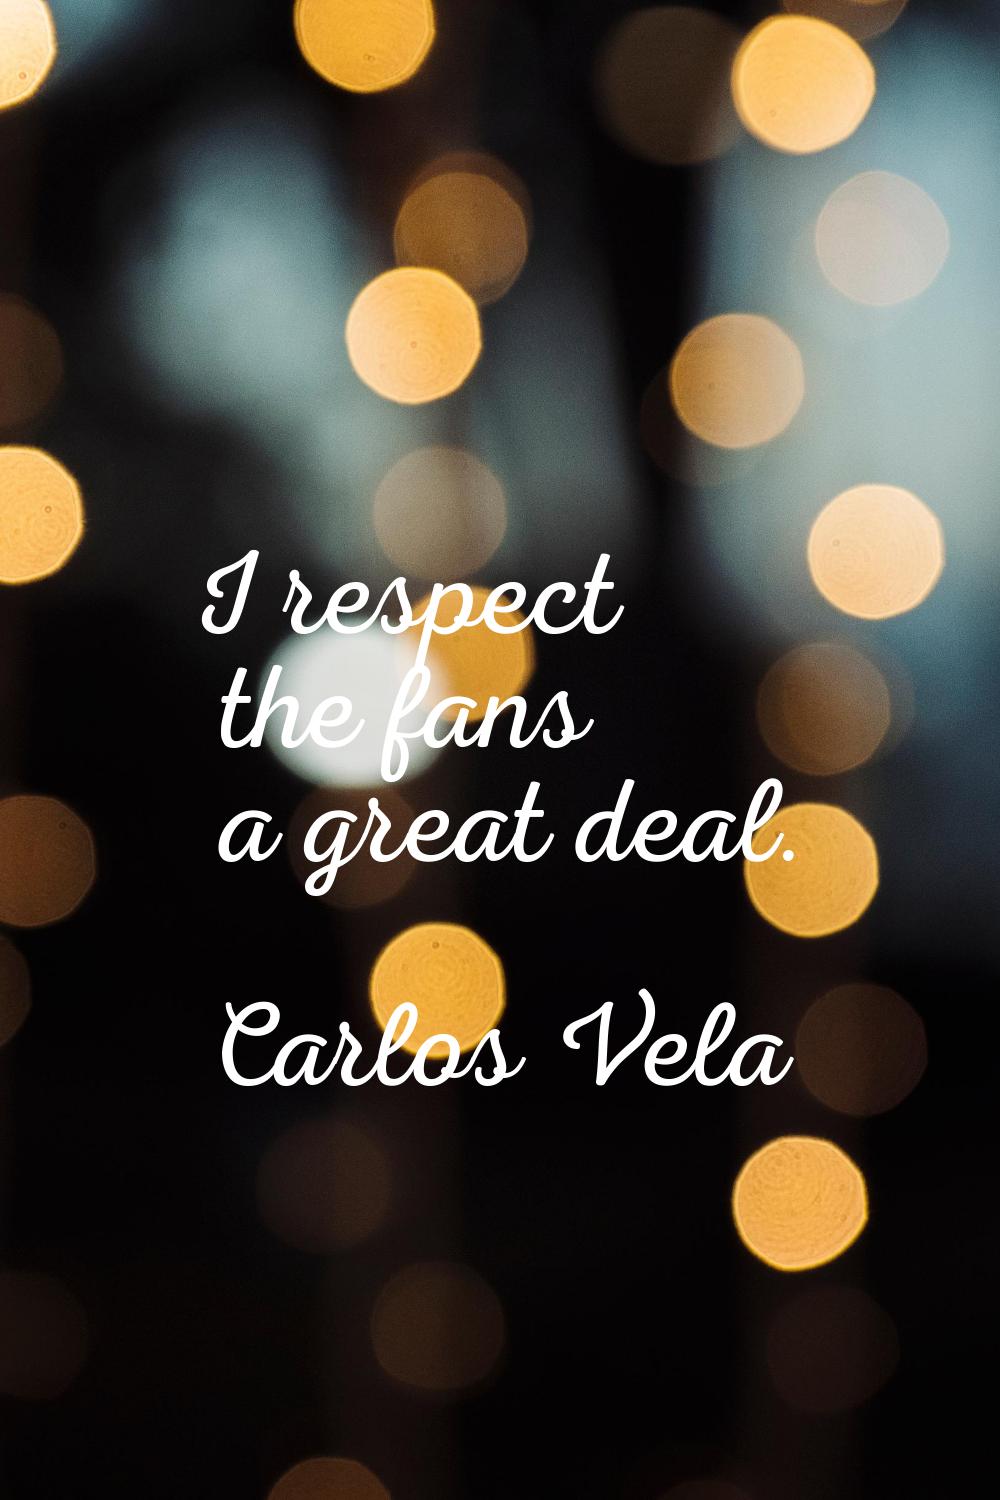 I respect the fans a great deal.